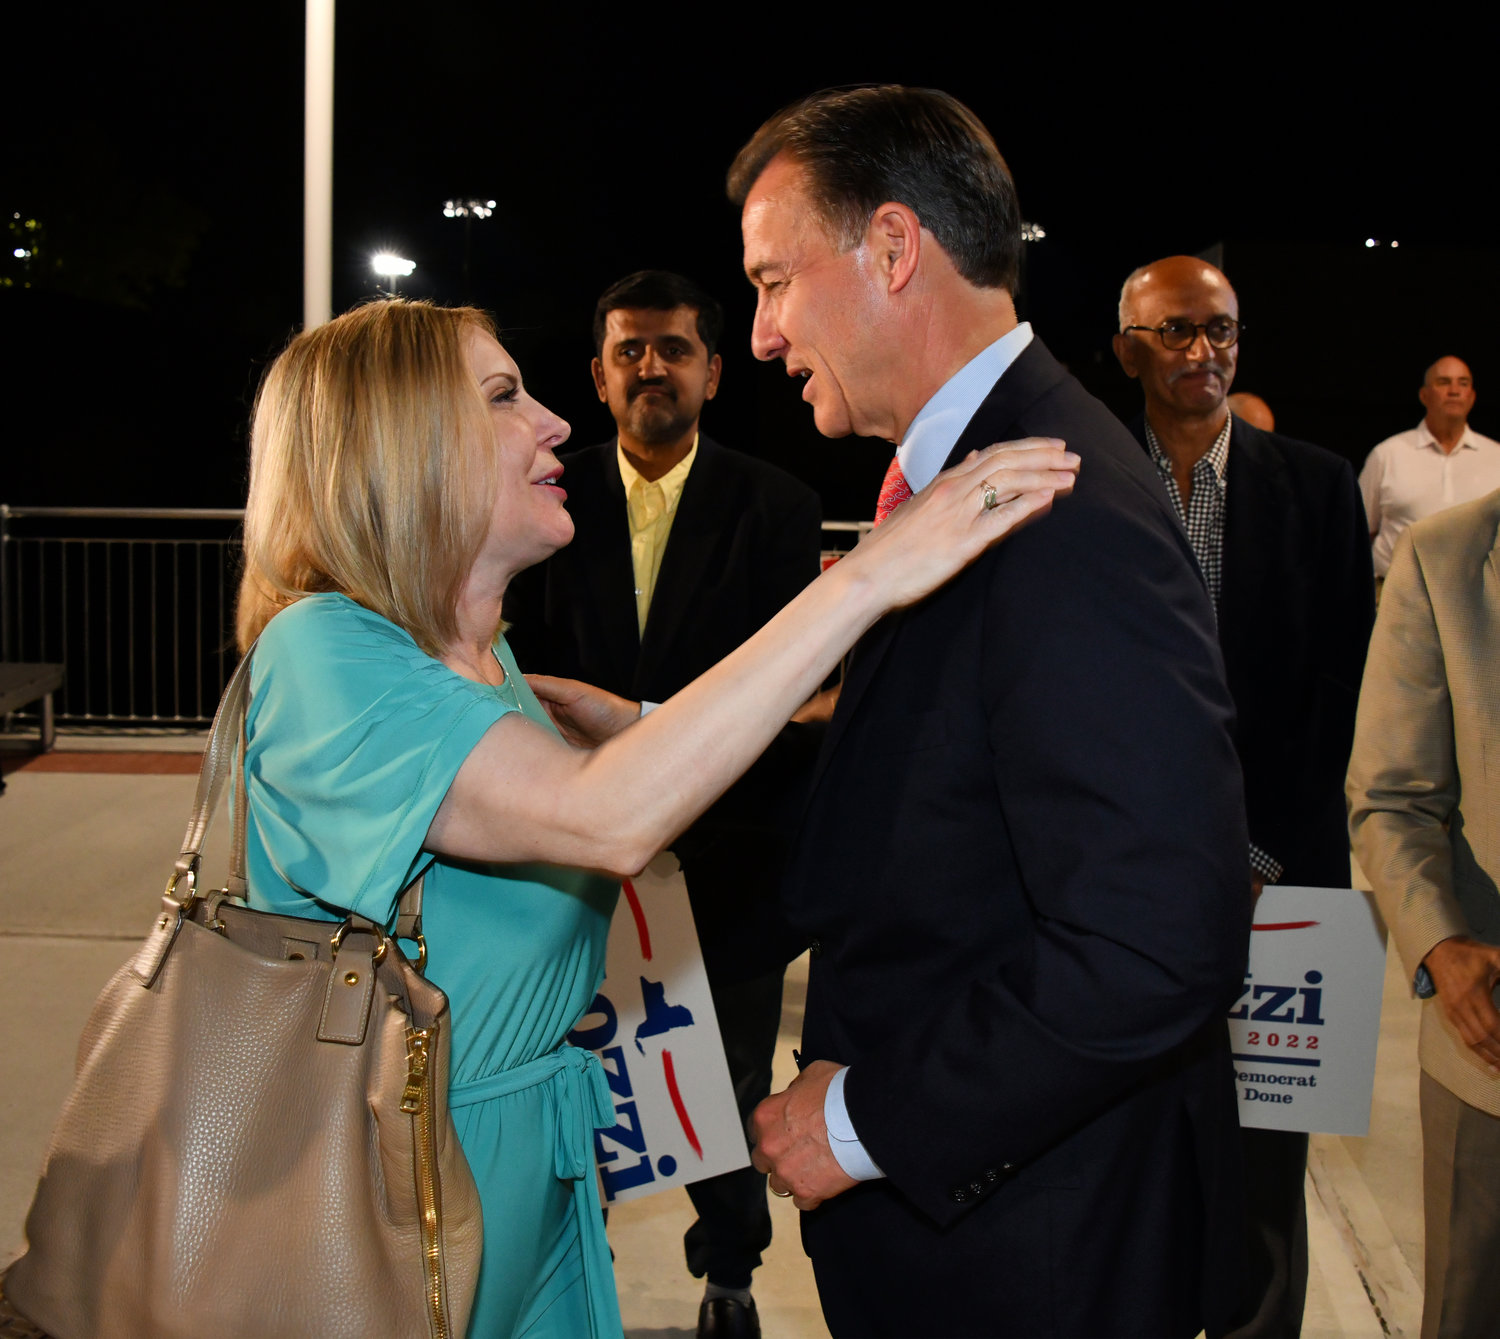 Former Glen Cove City Councilwoman Dr. Eve Lupenko Ferrante consoled Tom Suozzi, who lost by a wide margin in the Democratic primary on Tuesday. She and many supporters waited for Suozzi until 10:30 pm. at Garvies Point Brewery and Restaurant.